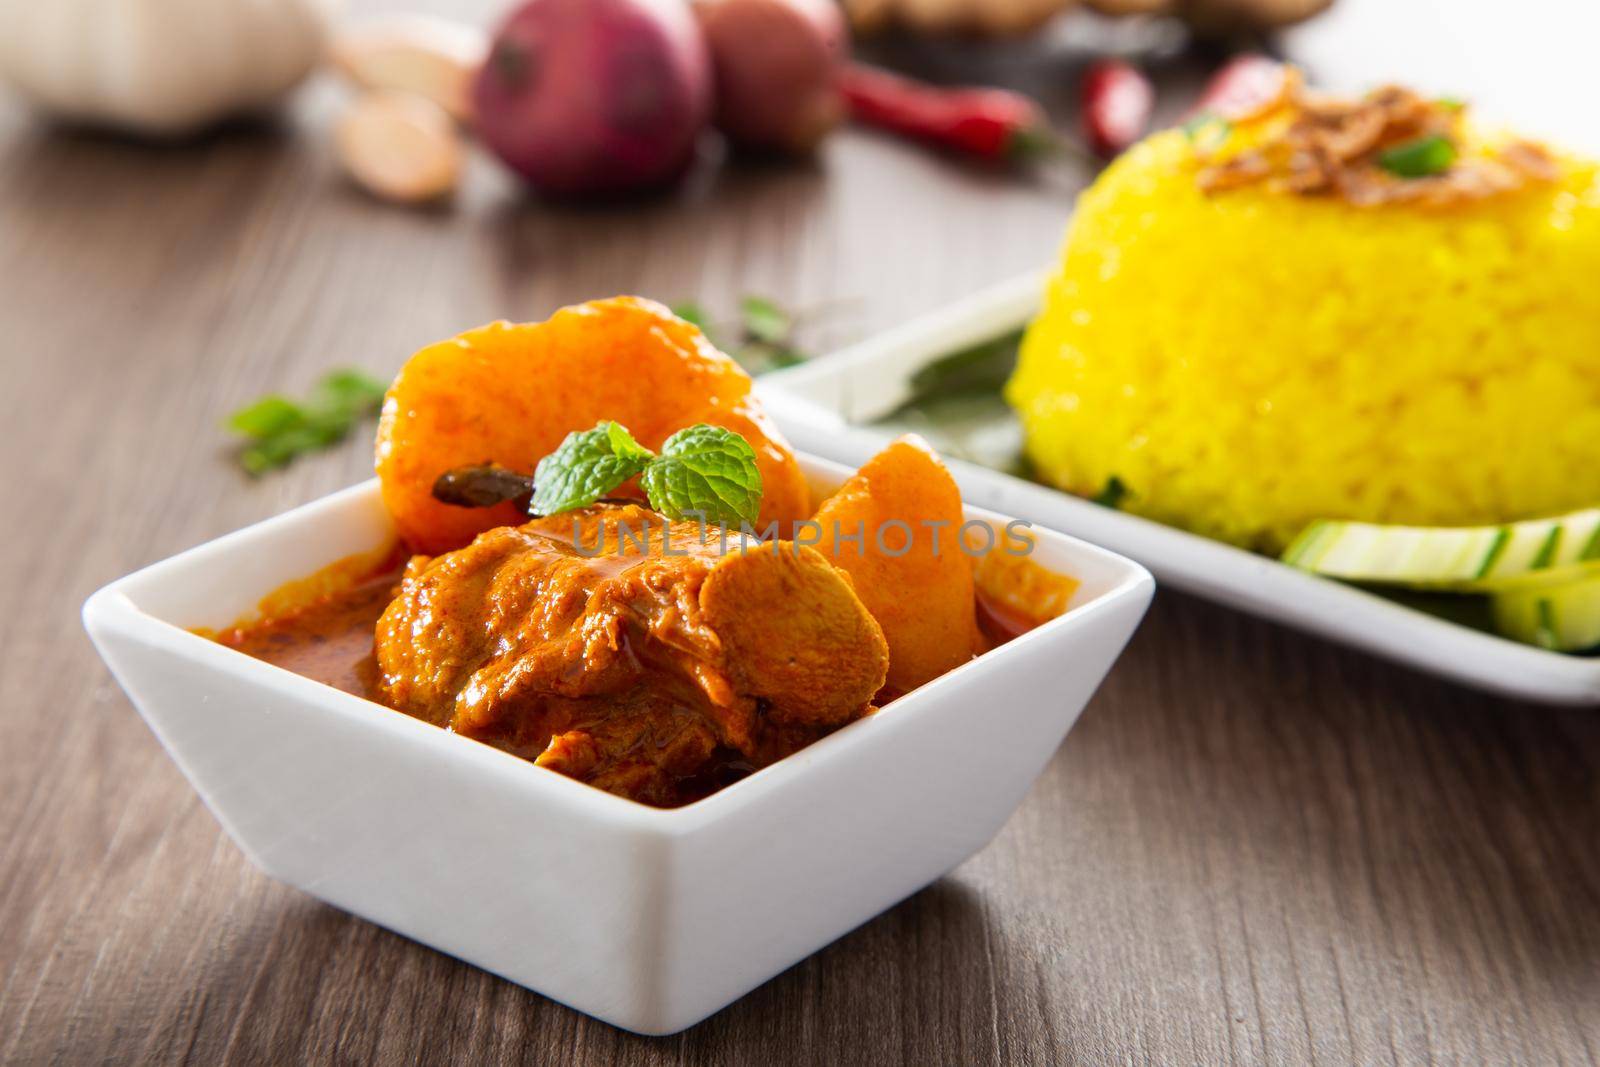 Turmeric Glutinous Rice also known as Nasi Kunyit. Normally eaten with dry curry chicken.